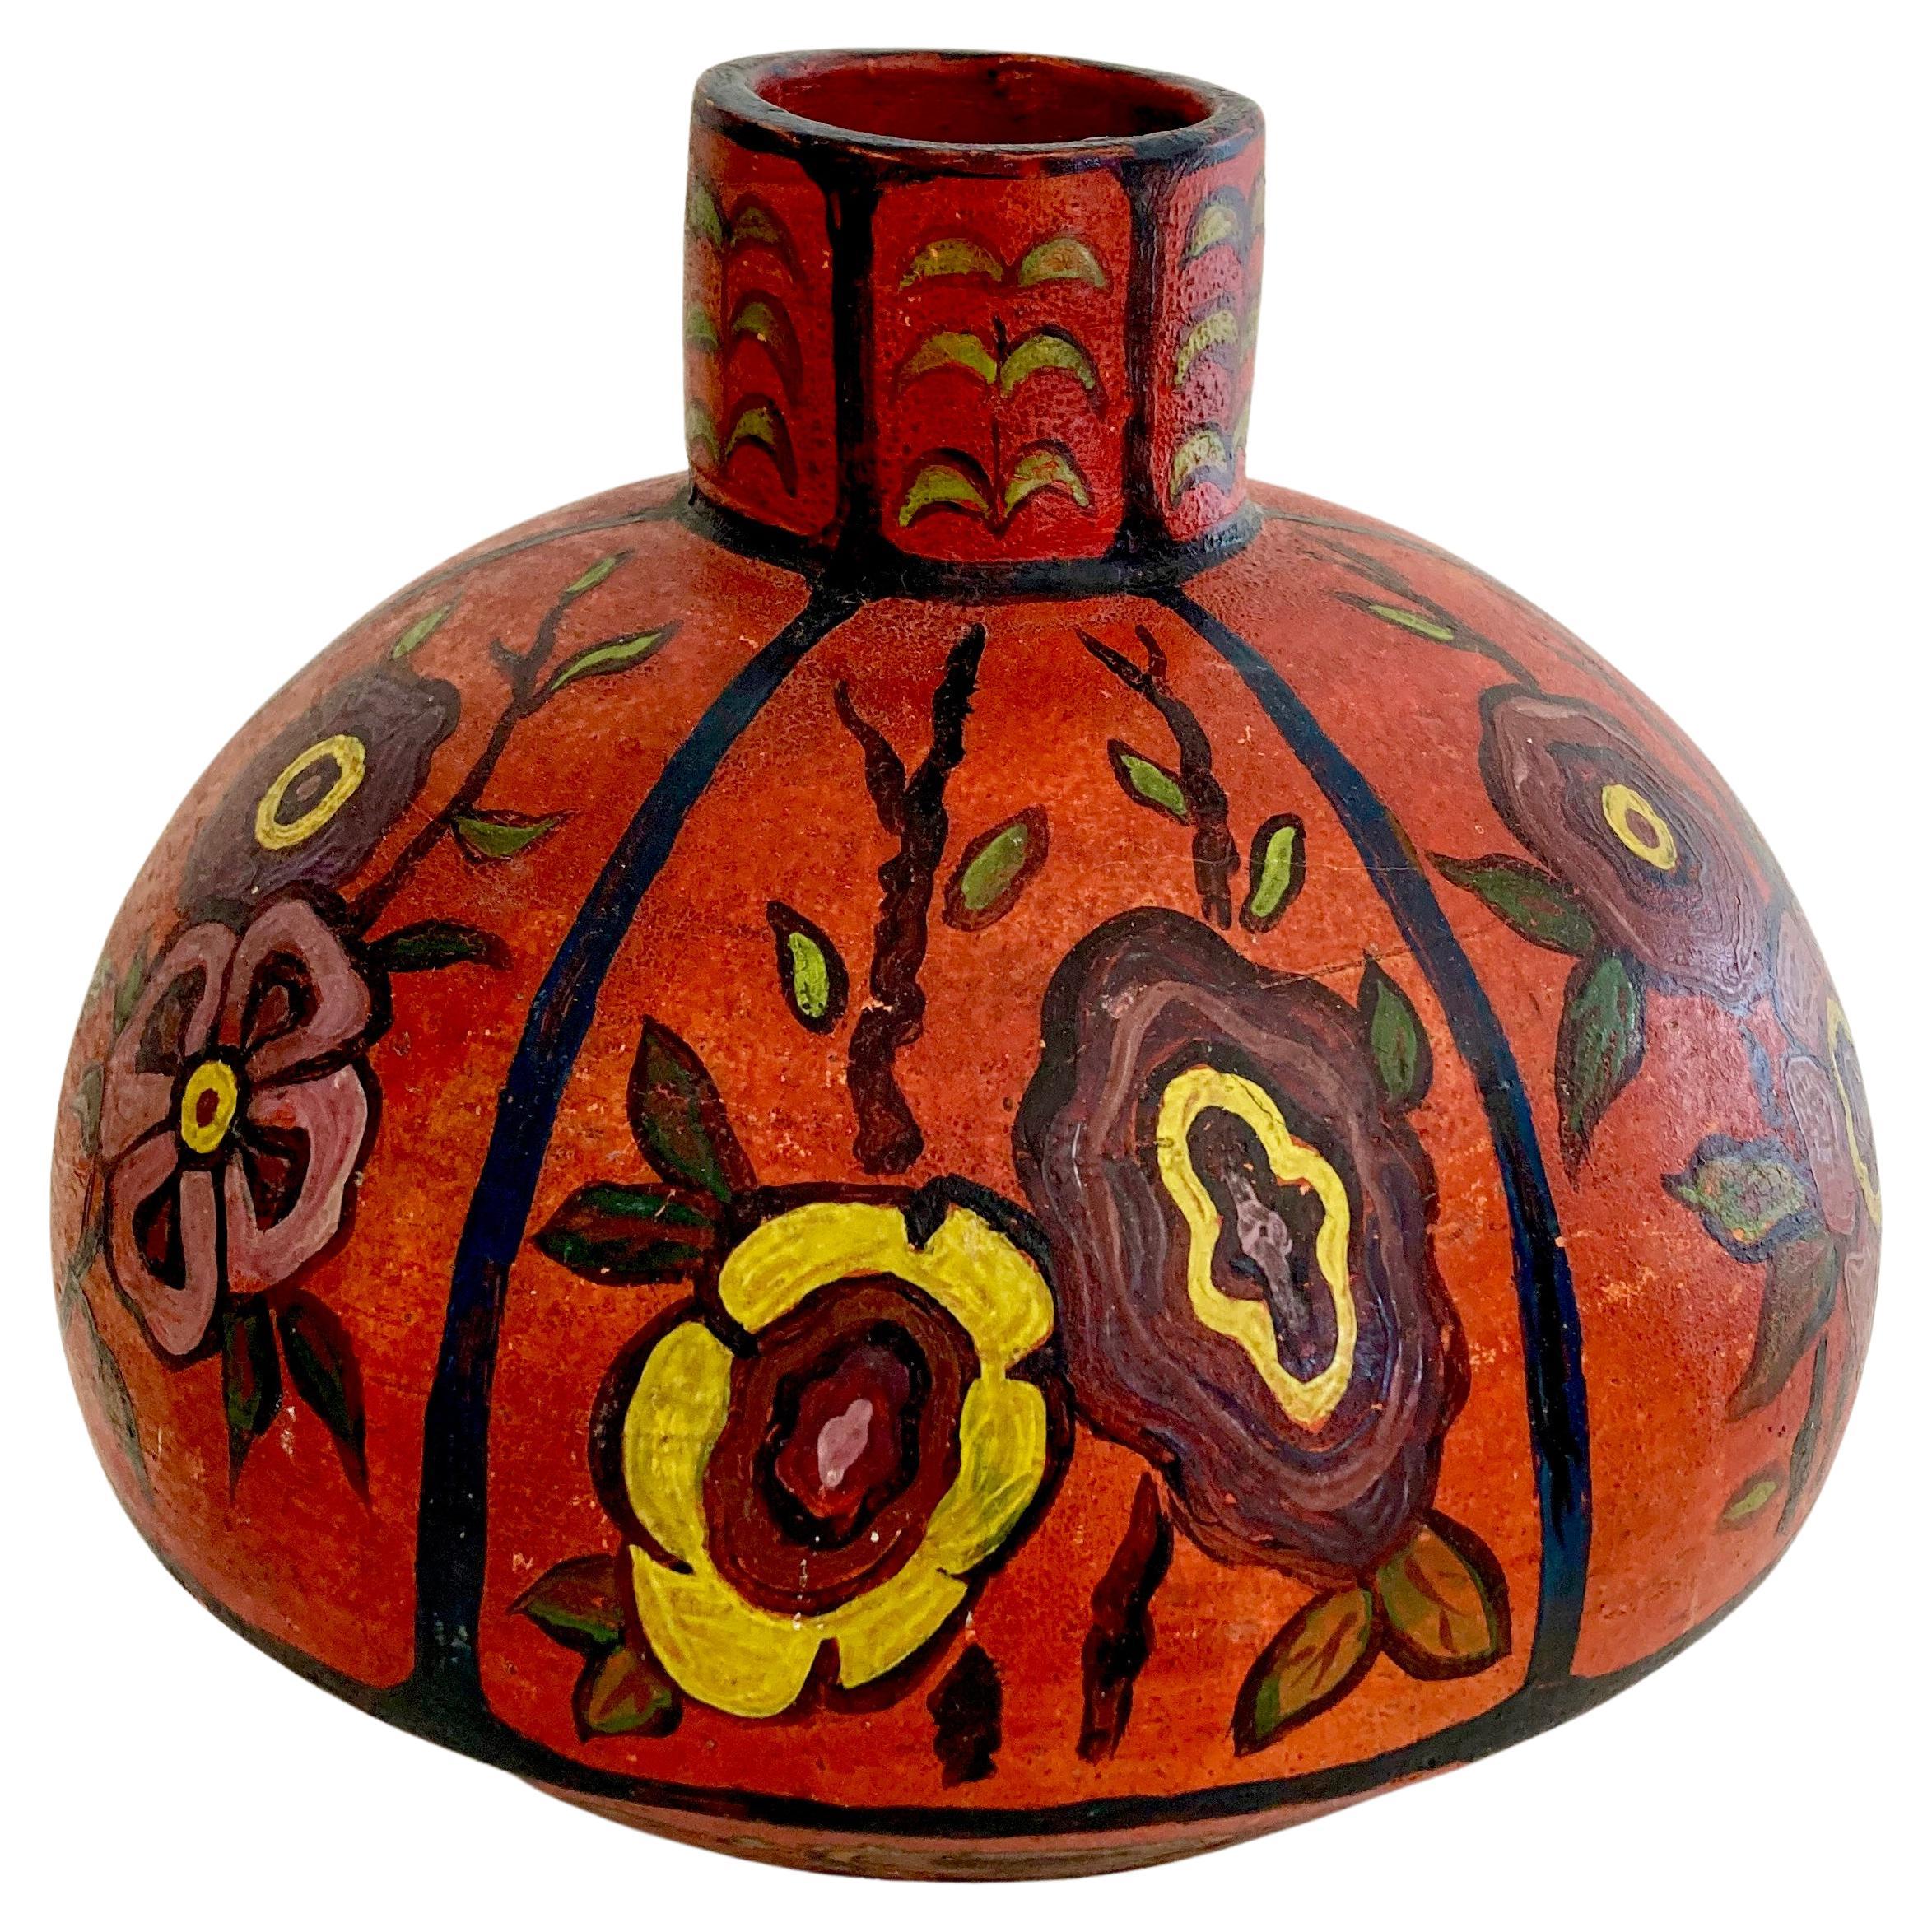 Antique Hand-Thrown and Hand-Painted Art Pottery Vase with Floral Motifs   For Sale